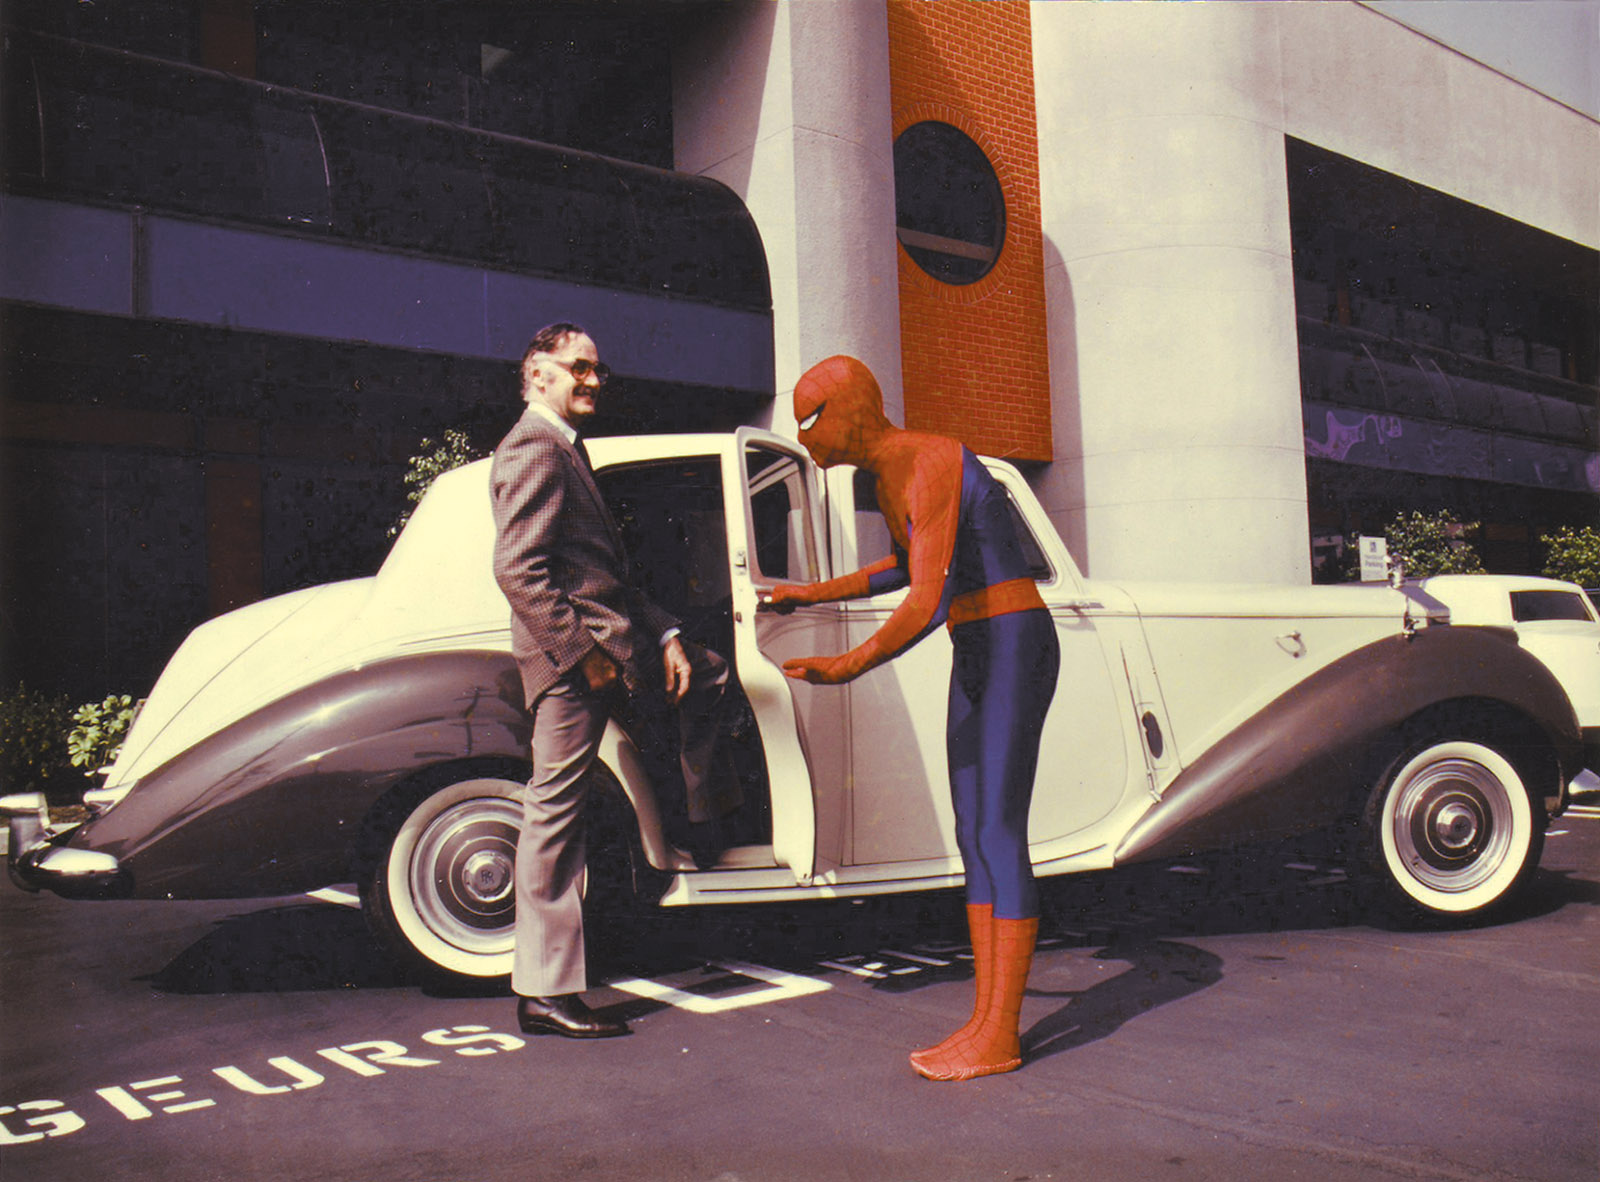 Stan Lee and a Marvel employee in Spider-man costume in the Marvel Productions parking lot